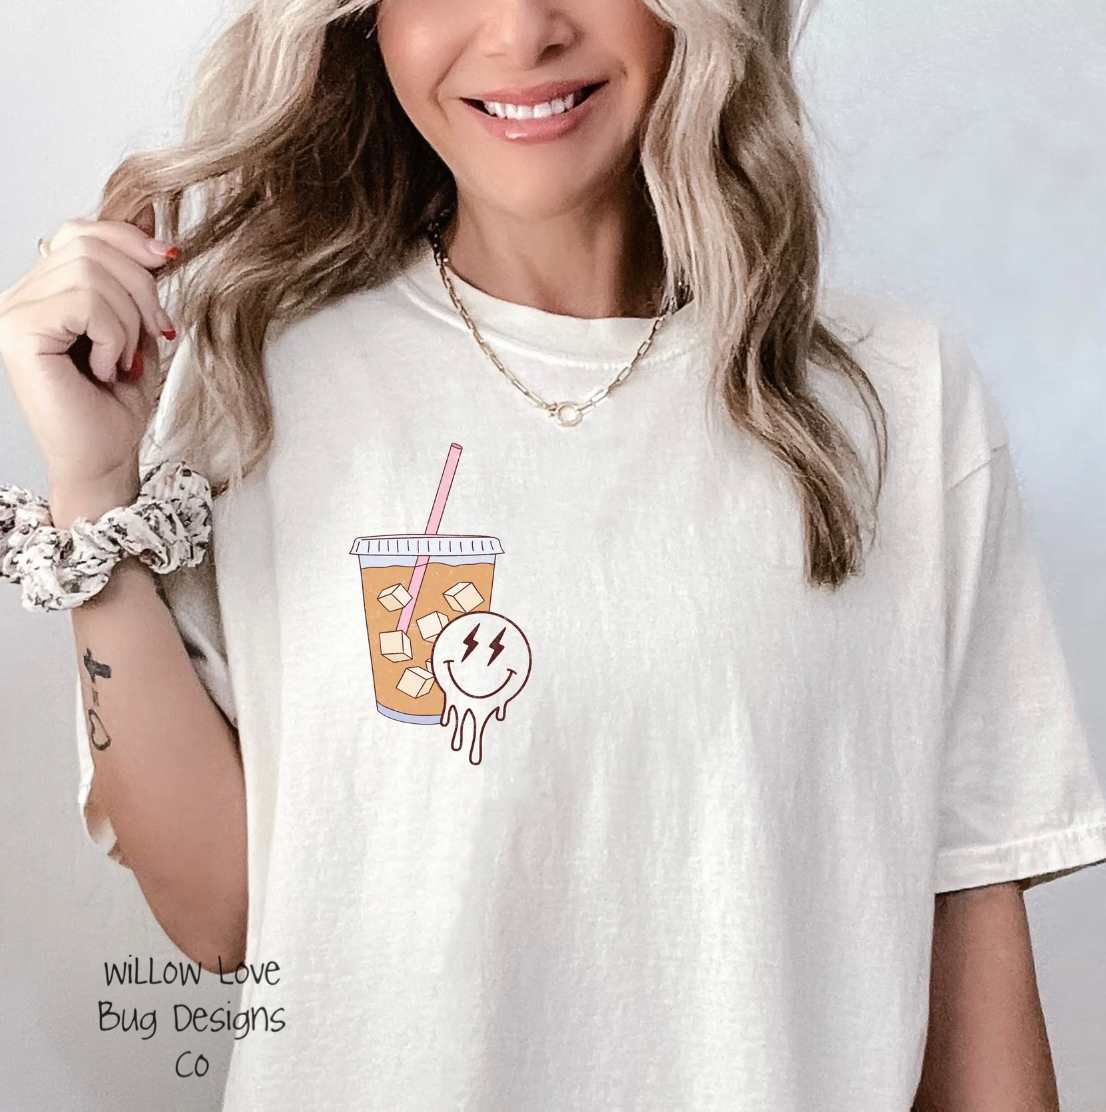 Fulled By Iced Coffee & Anxiety Front & Back Tee - Willow Love Bug Designs 